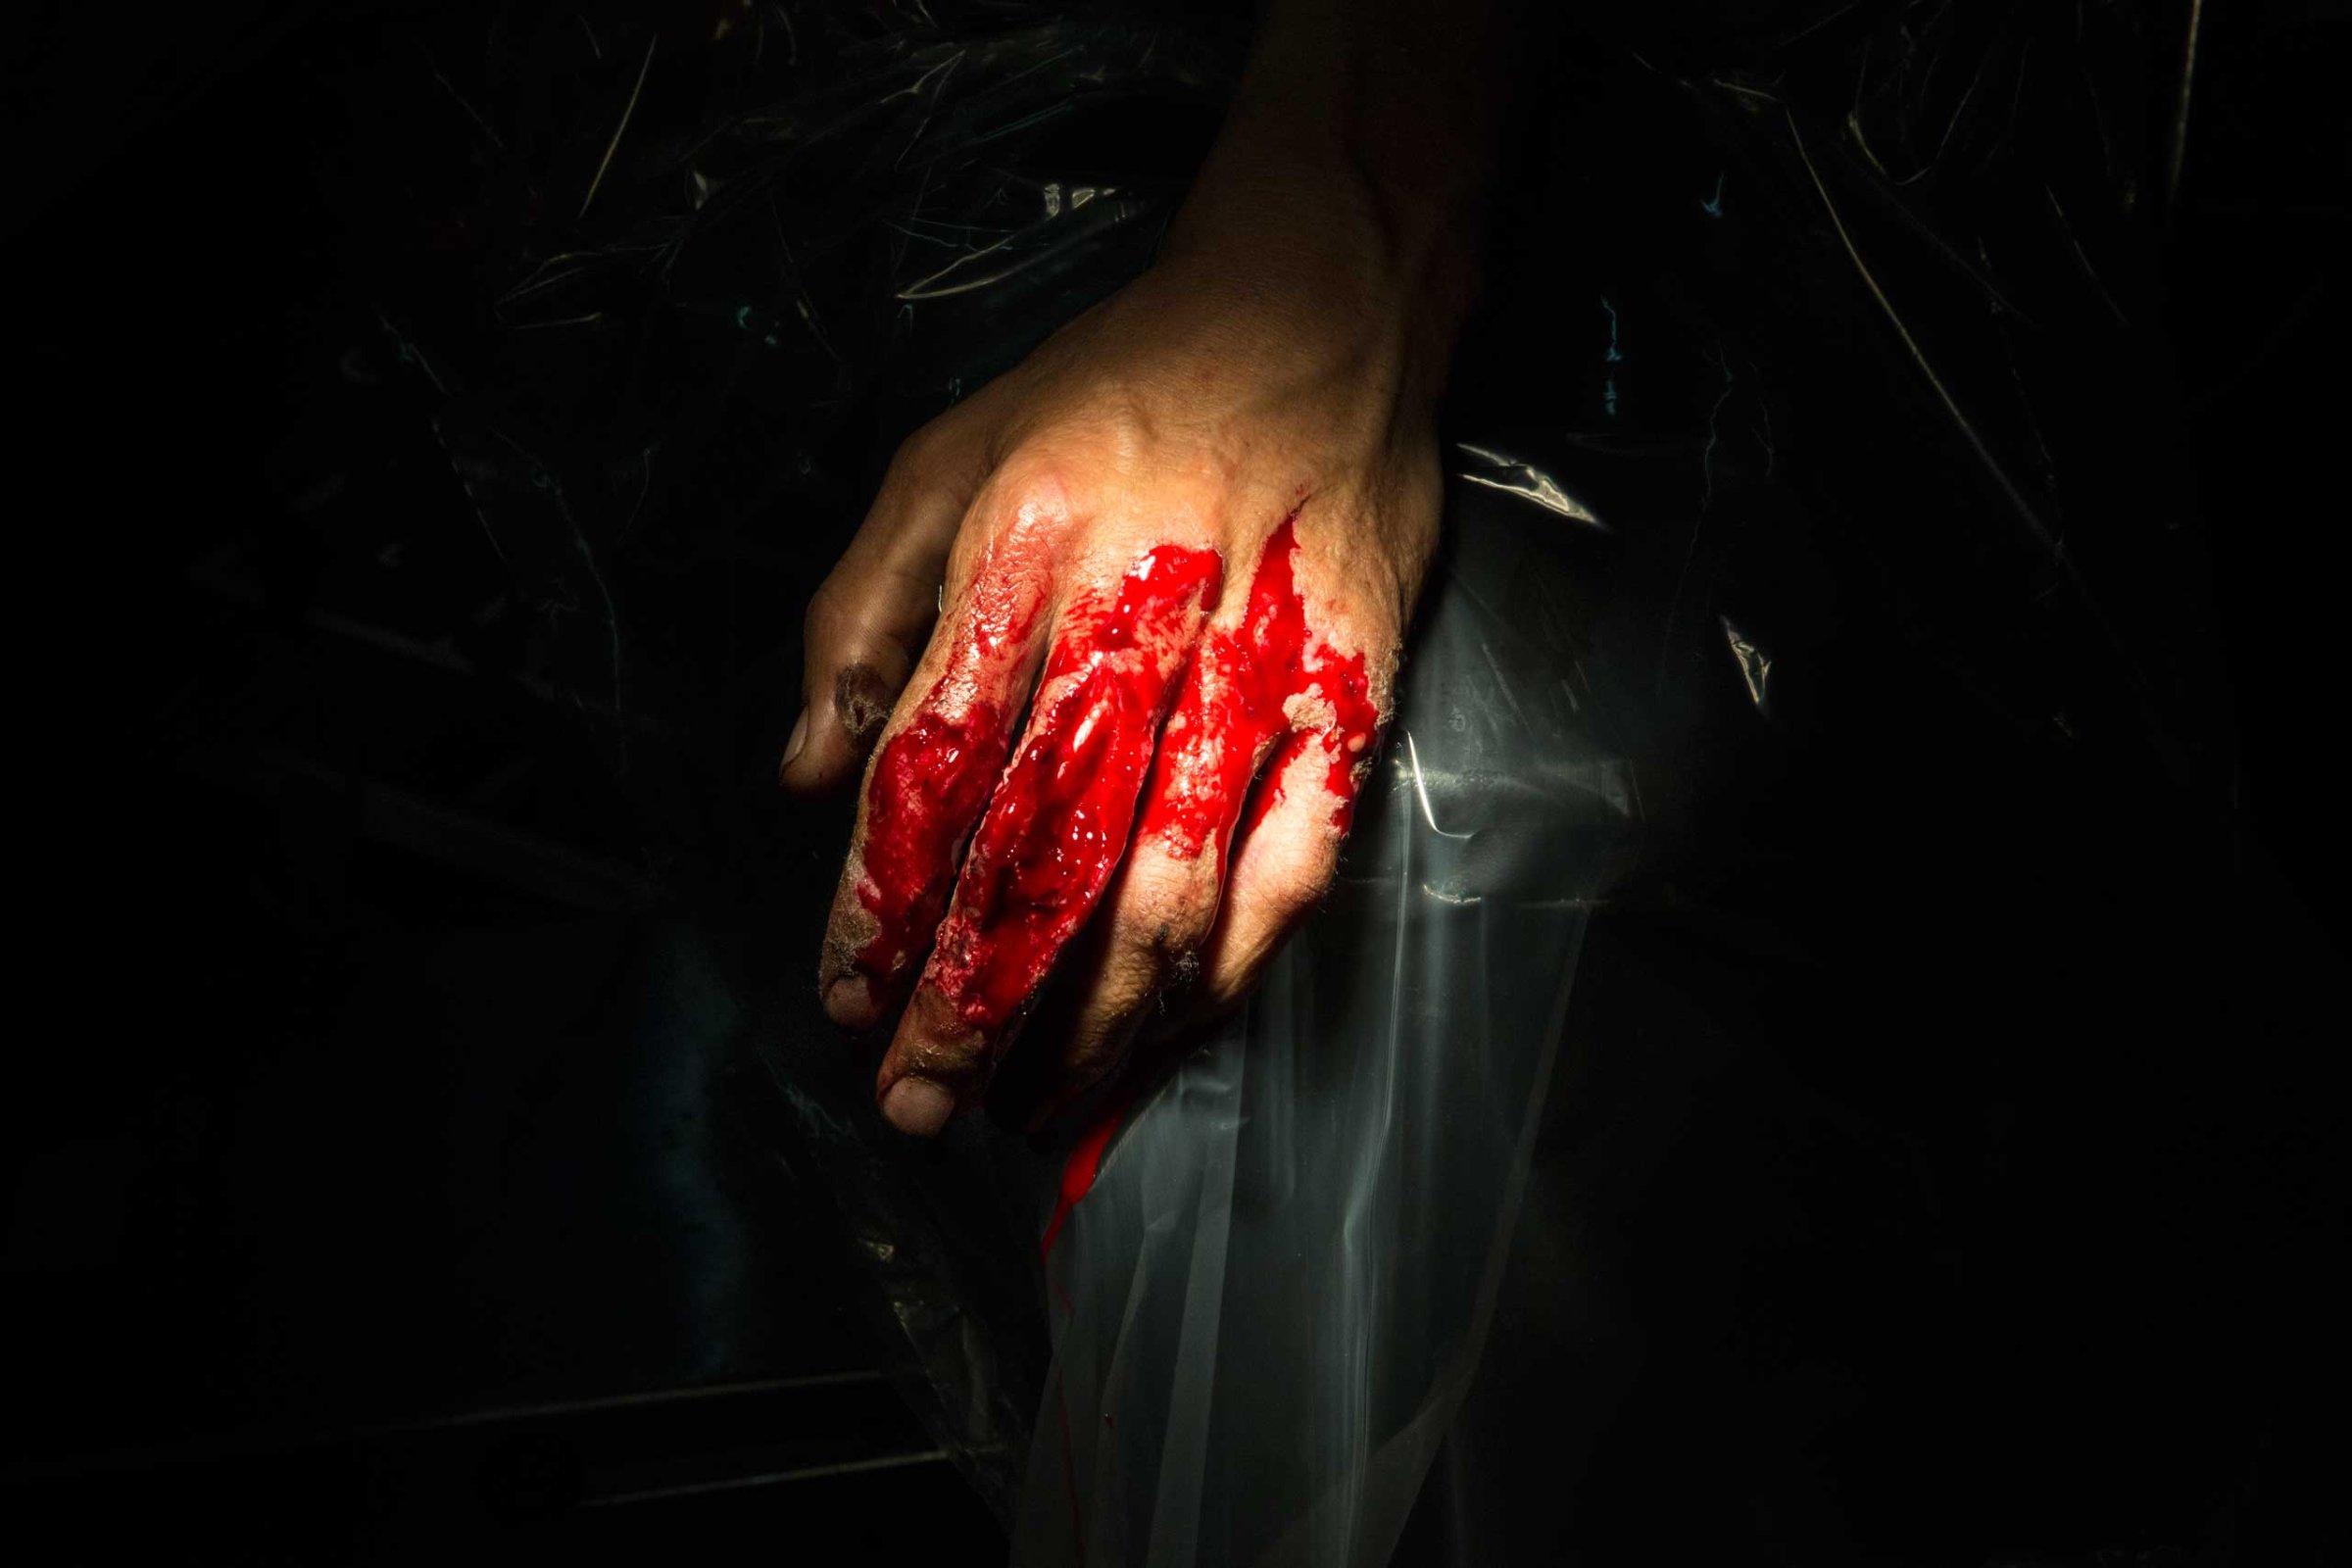 A bloody hand is seen in the operation room at the Emergency hospital in Lashkar Gah, Afghanistan on March 26, 2015.